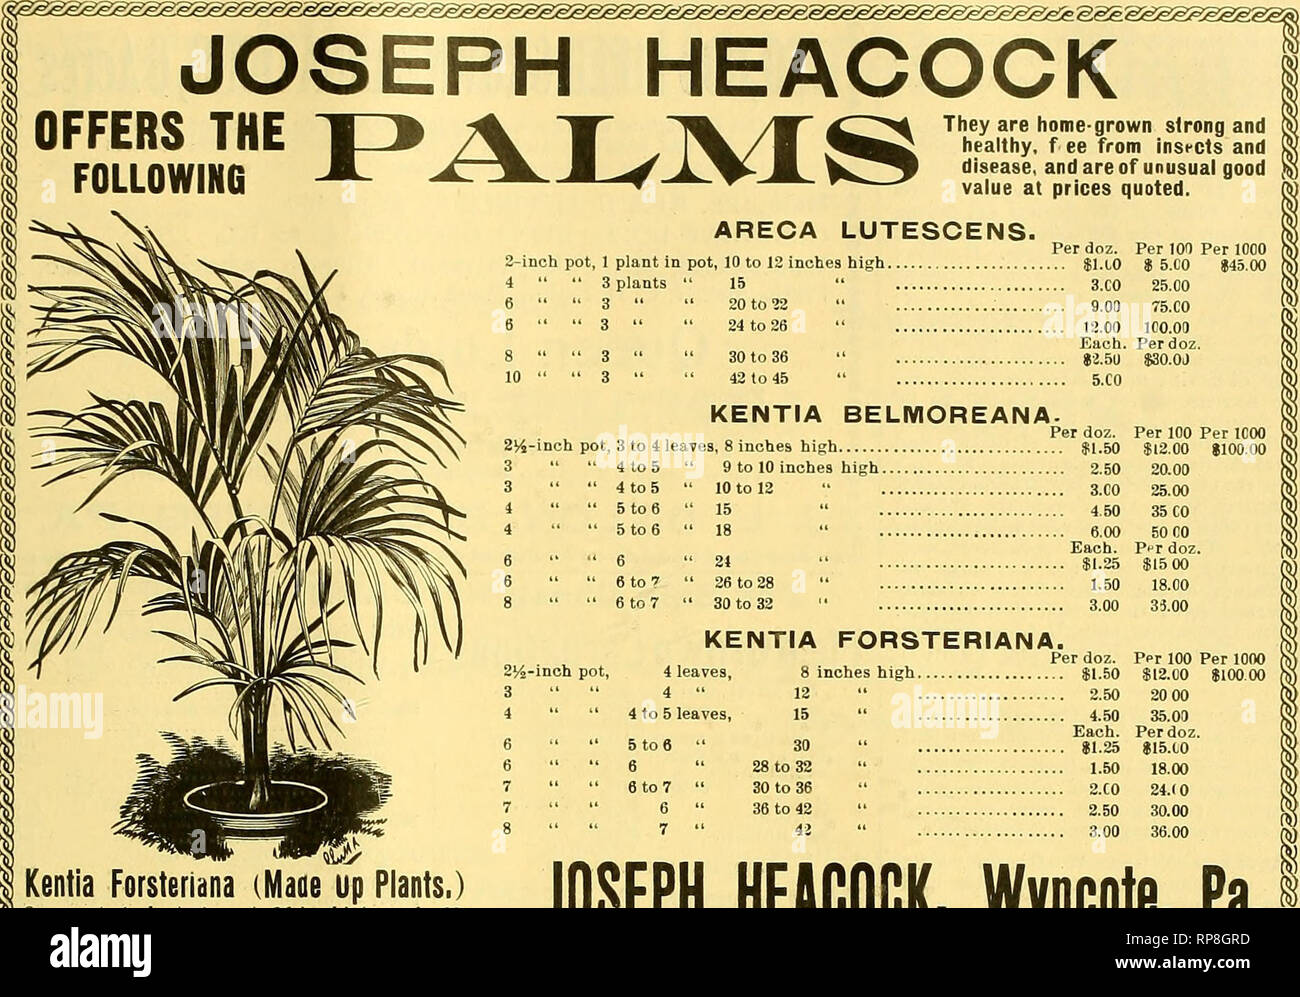 . The American florist : a weekly journal for the trade. Floriculture; Florists. igoi. The American Florist. 241. JOSEPH HEACOCK, Wyncote, Pa. Kentia Forsteriana (Maae up Plants,) 8-111. pot, 4 plants in pot, 36-in. high, eath, $3. FROM FIELD P/EONY ROOTS CARNATIONS Perfect Condition. Perino G. LORD, large size $8.00 G.^LOm' ^ good Size 6.C0 E. CROCKER, AMERICA, CRANE, G. NUGGET, JOOST, ALBhRTlNI, DAYBREAK, VICTOR, good size. $5.00 per 100; t45.00 per 1000. CARDINAL, McGOWAN, SCOTT, J4.C0 per 100; $33.1,0 per luoU. Brown &amp; Canfleld. Springfield, III. Order ^ow for Fall Delivery ' Laree Fie Stock Photo